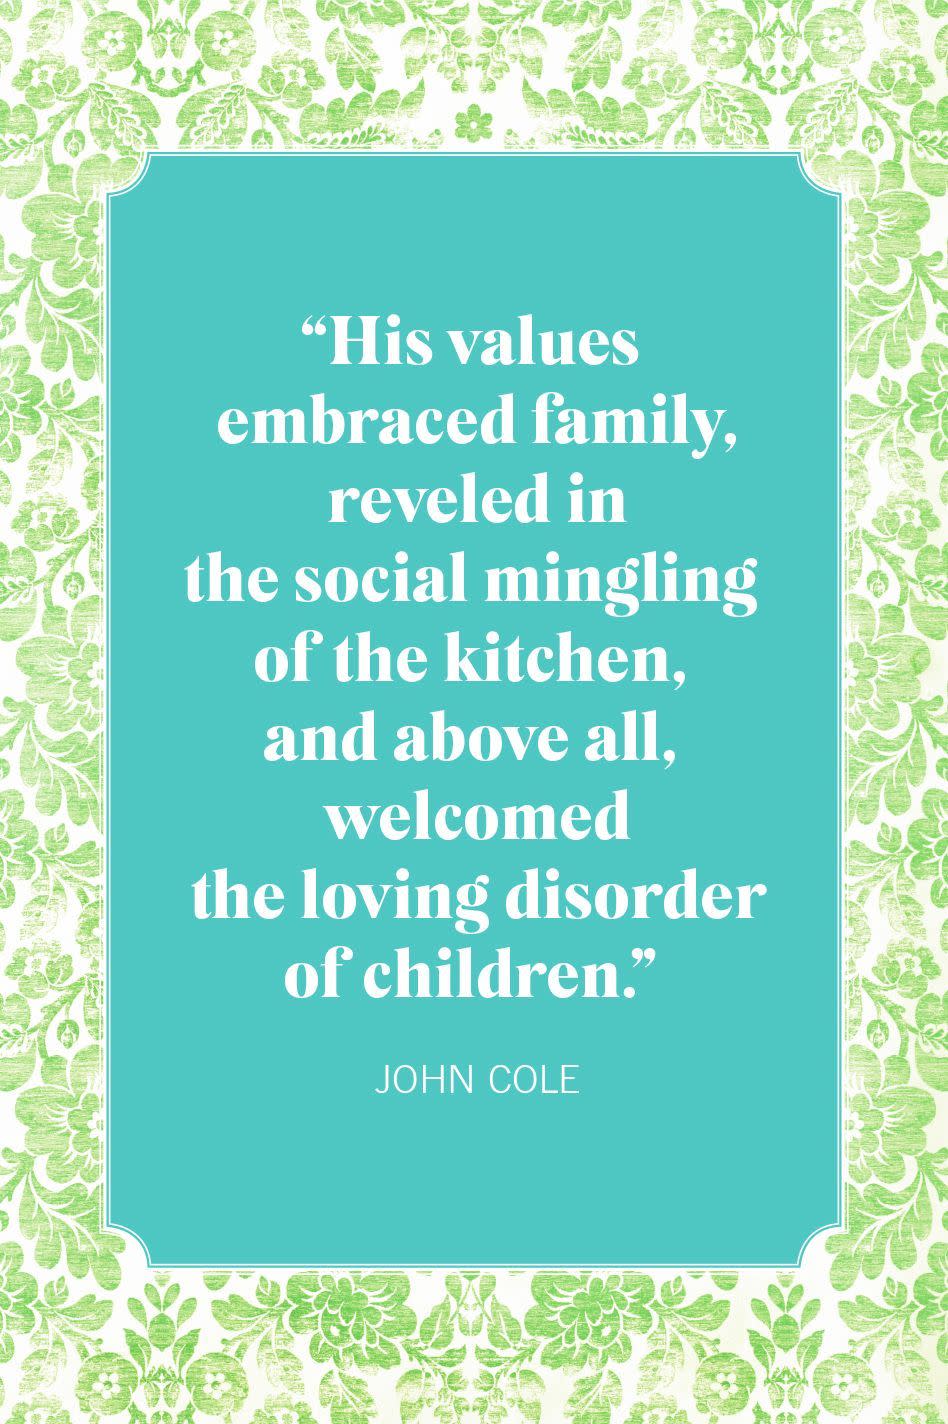 <p>"His values embraced family, reveled in the social mingling of the kitchen, and above all, welcomed the loving disorder of children."</p>